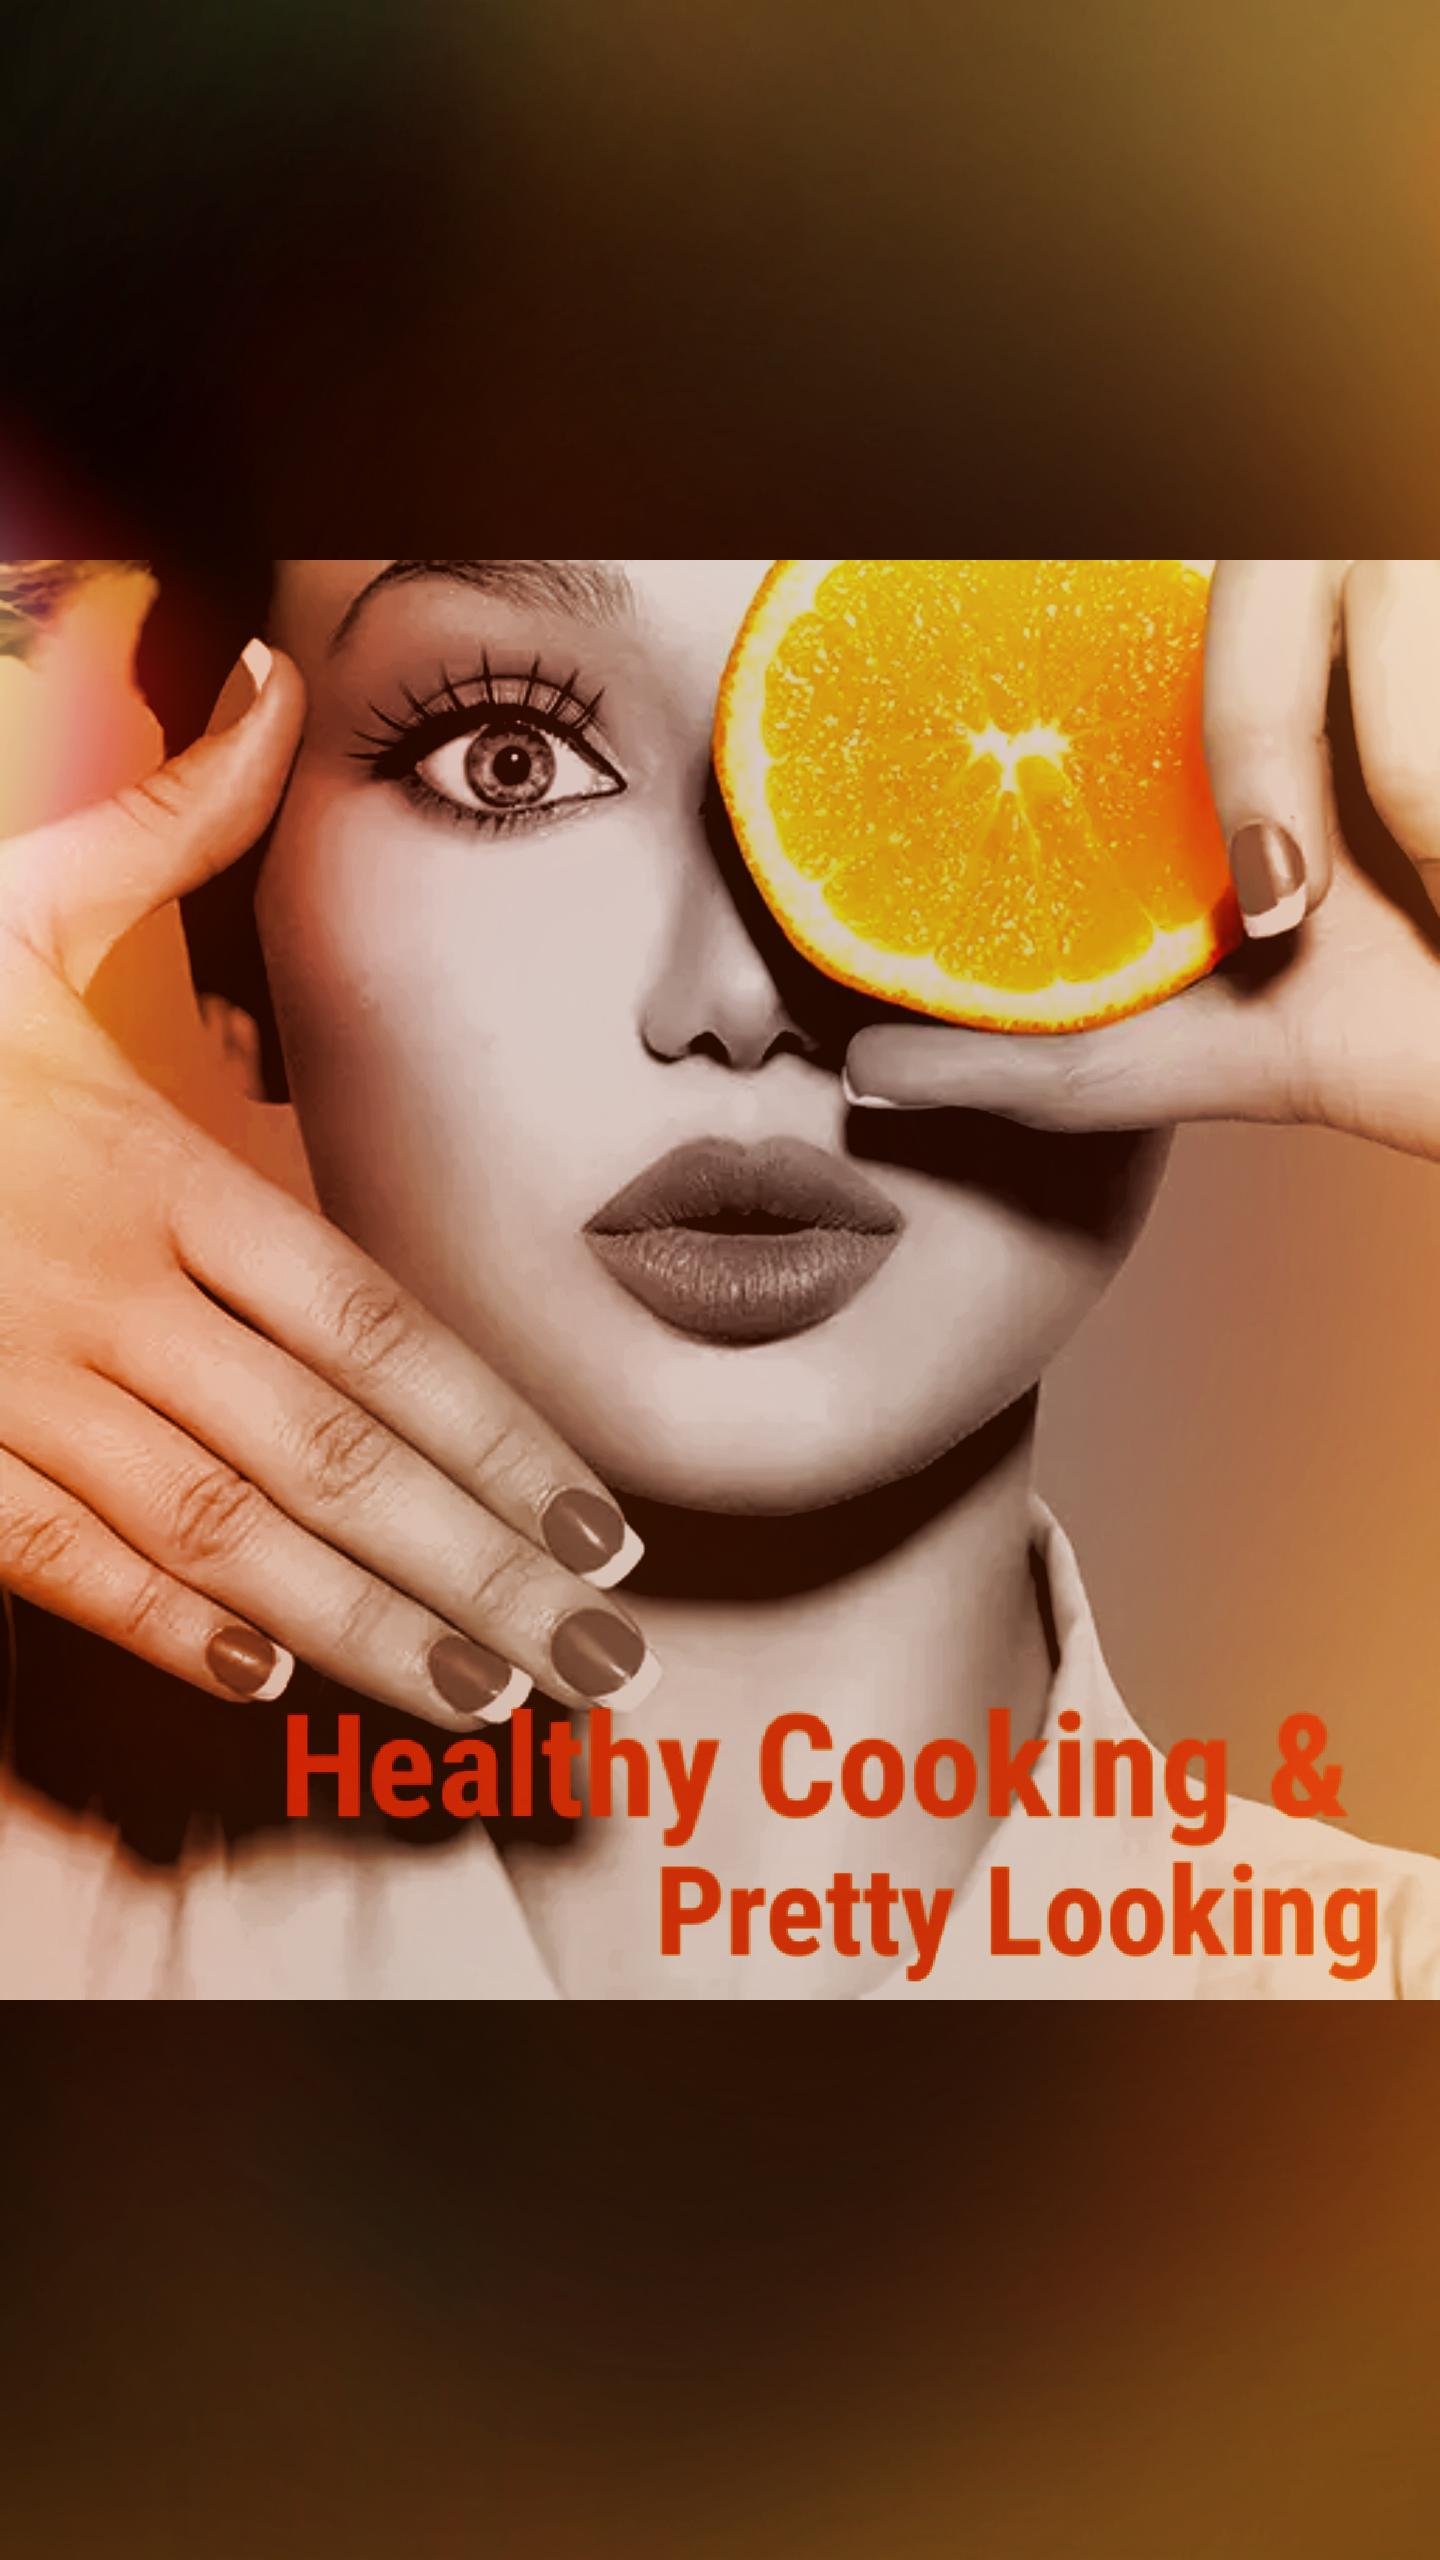 Life is good when you are healthy and even more good when you are pretty too. We will bring exciting recipes, tips & tricks, gup shup, make-up reviews and much